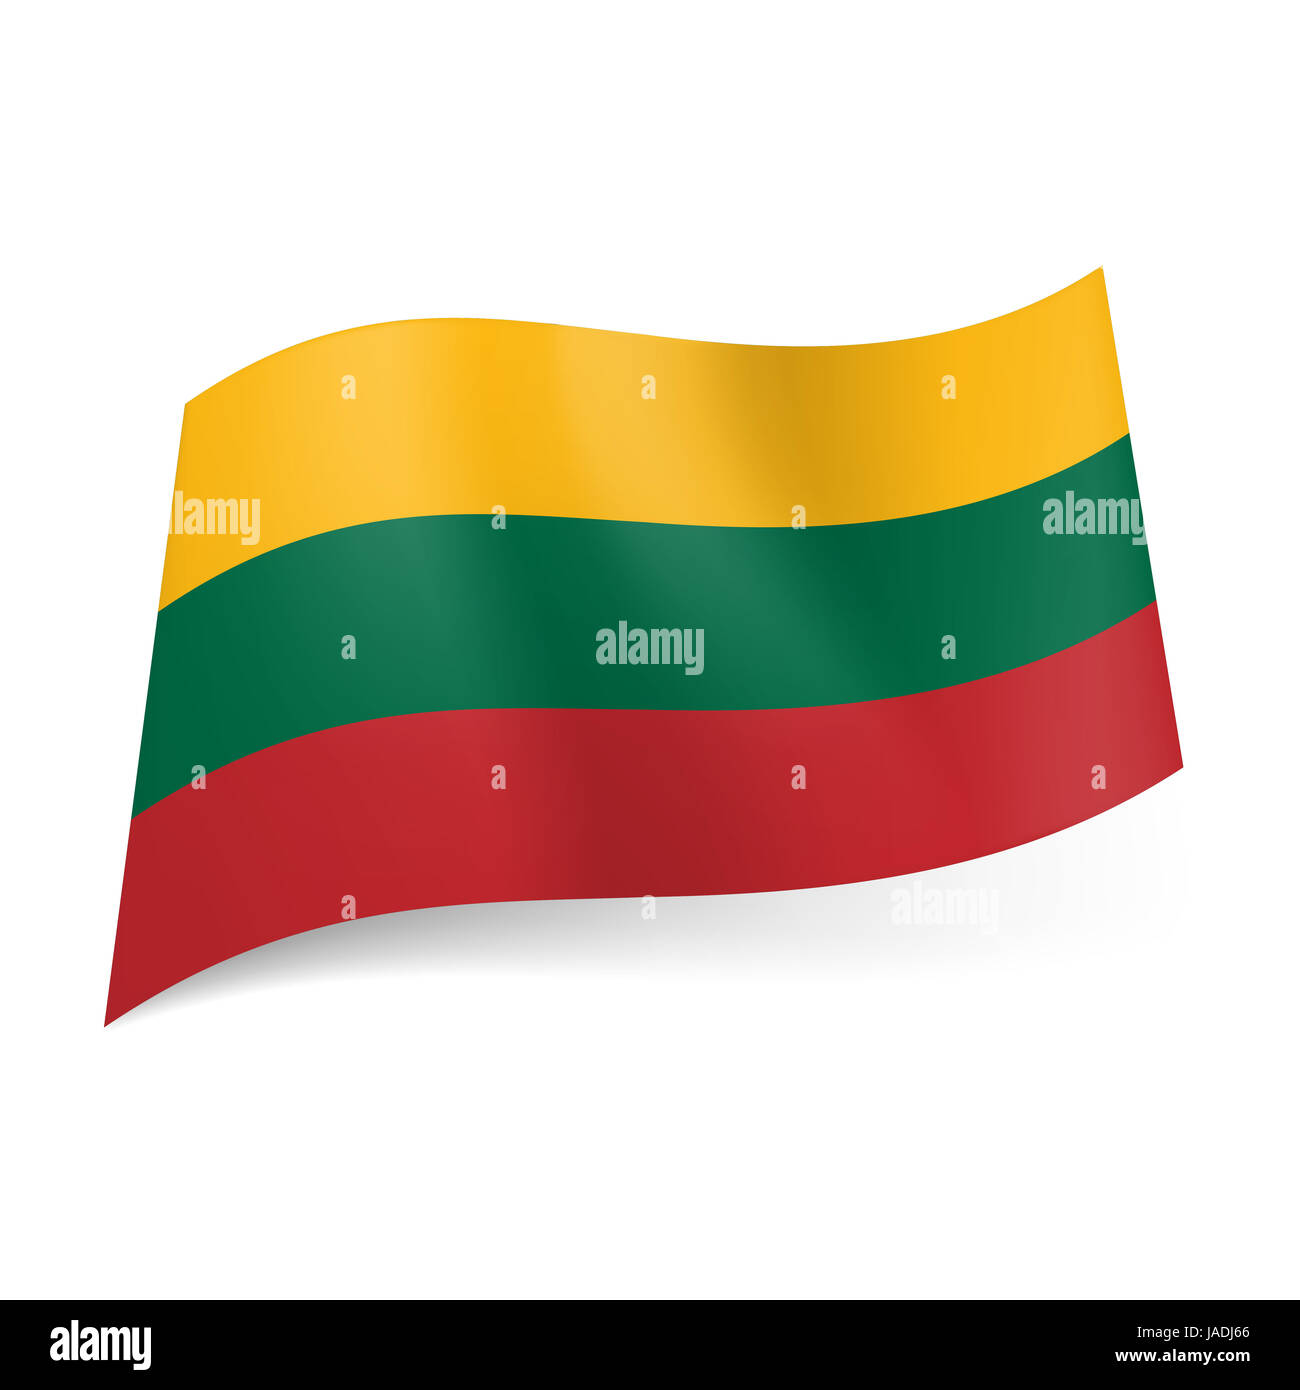 National flag of Lithuania: yellow, green and red horizontal stripes. Stock Photo